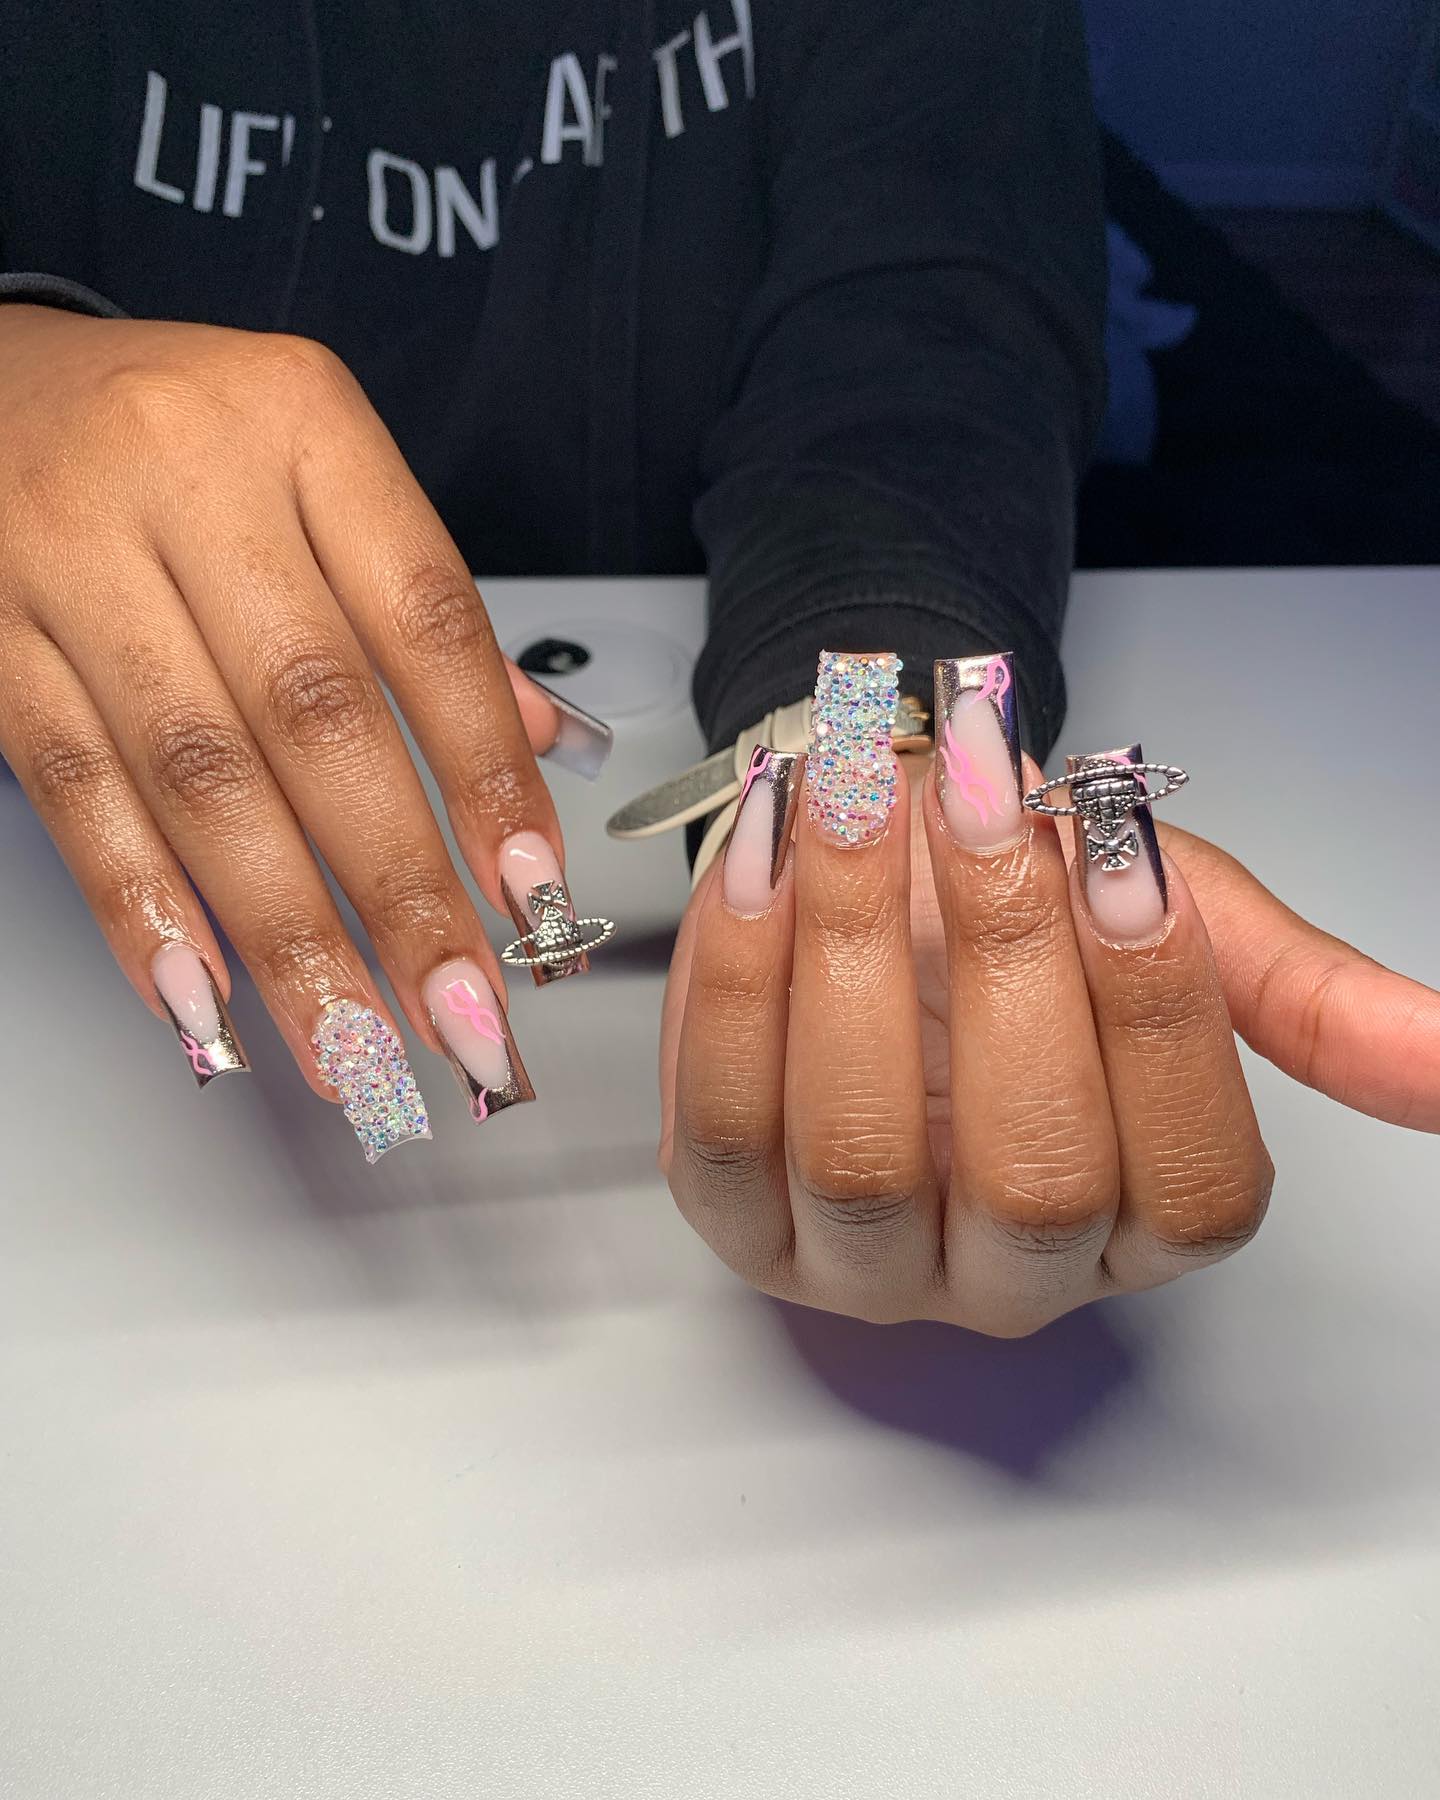 The Best Coffin Acrylic Nails to Inspire Your Next Manicure